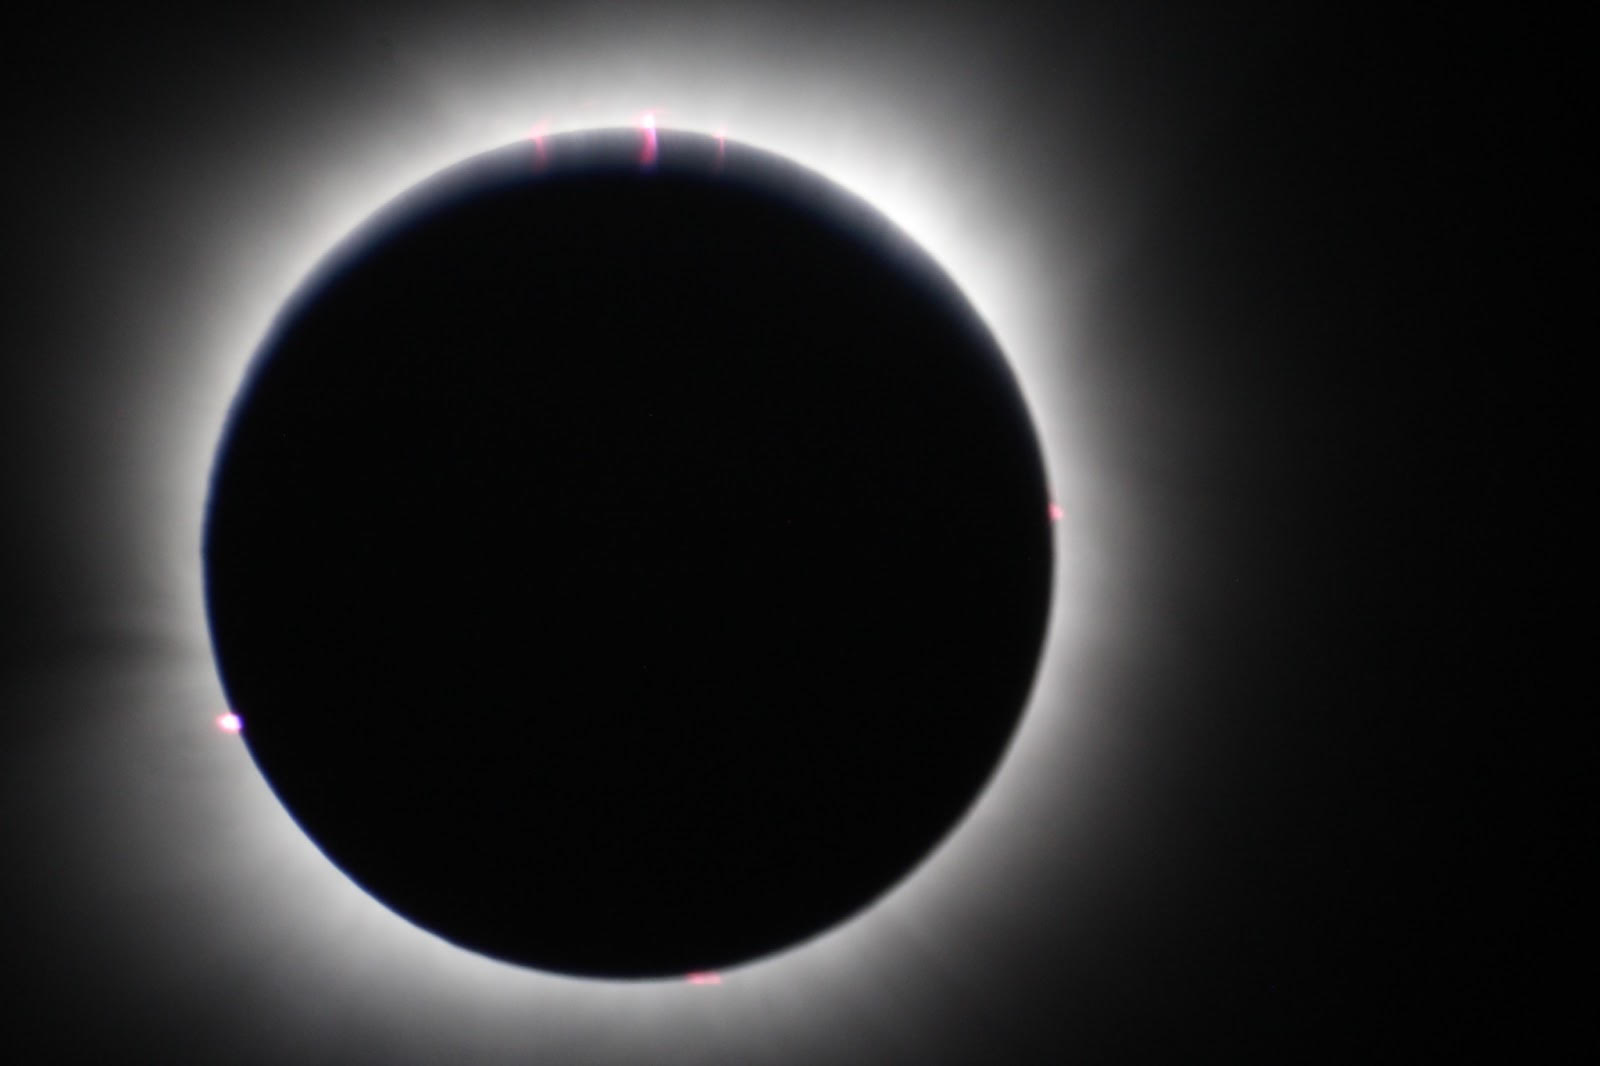 another cool picture of eclipse with corona and sun activity visible